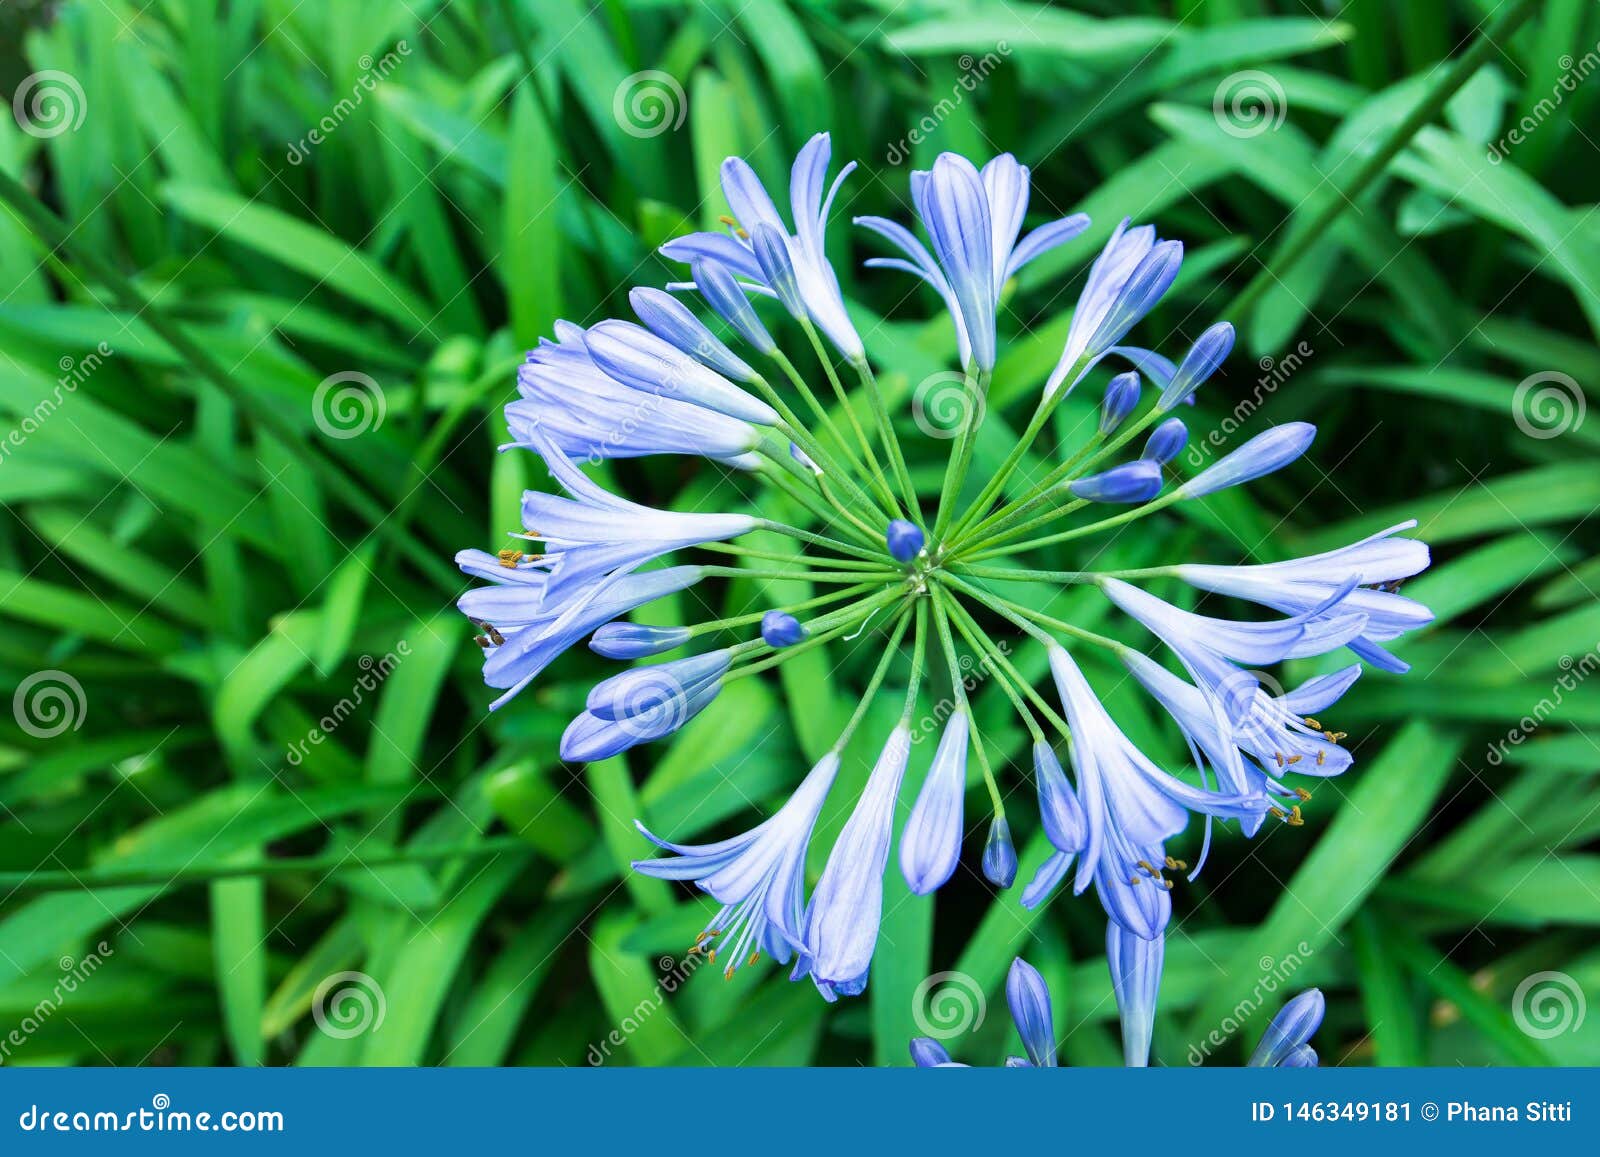 African Lily Flowers in the Park. Agapanthus Africanus. Coroas De Henrique  Stock Image - Image of green, henrique: 146349181